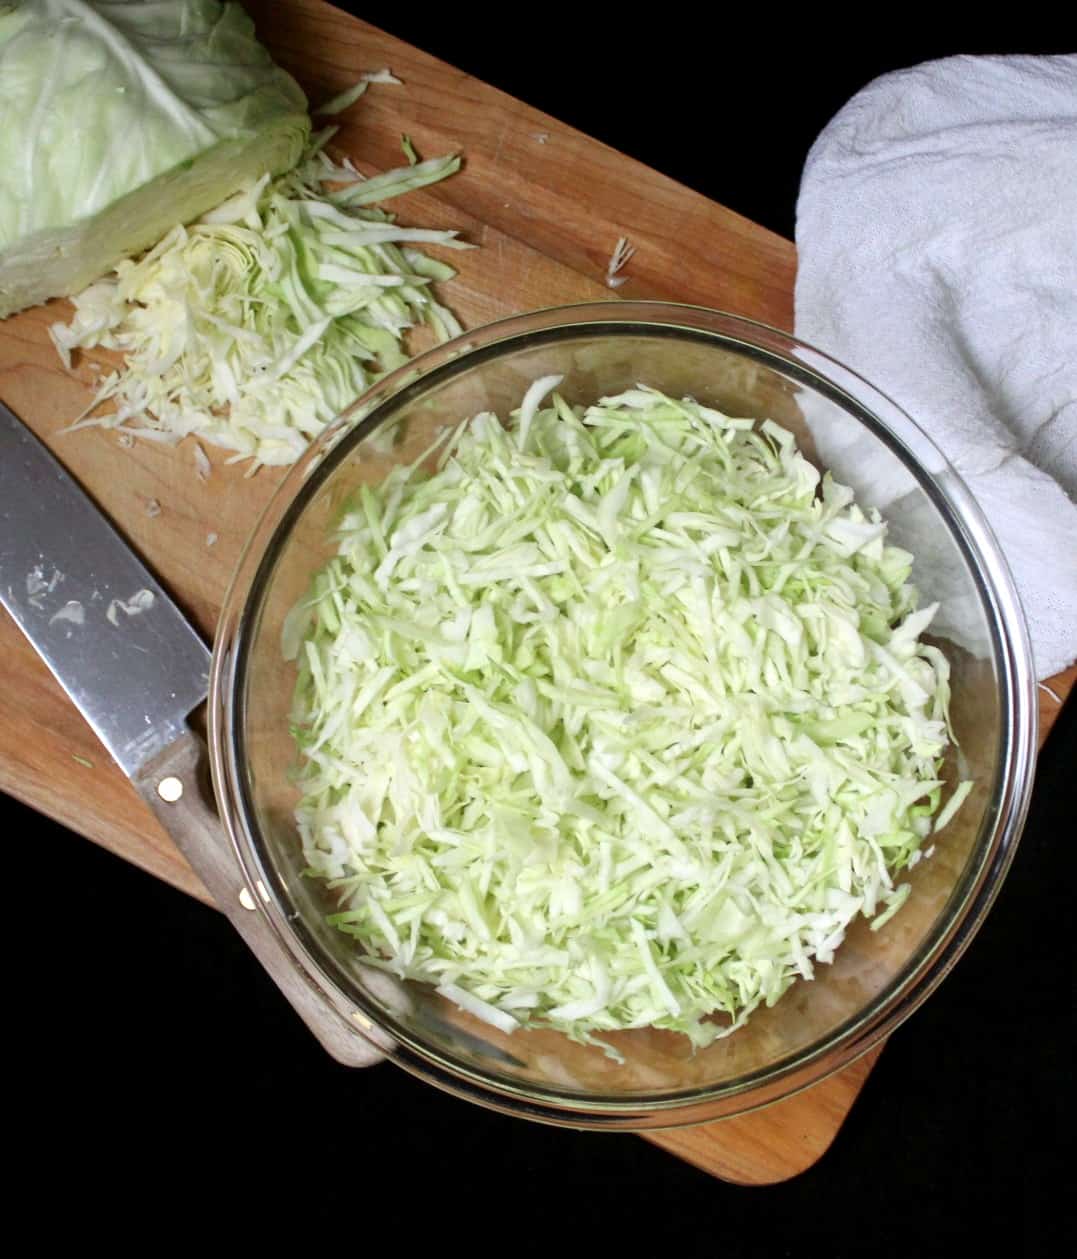 Finely shredded cabbage for sauerkraut in a bowl with a knife and chopping board